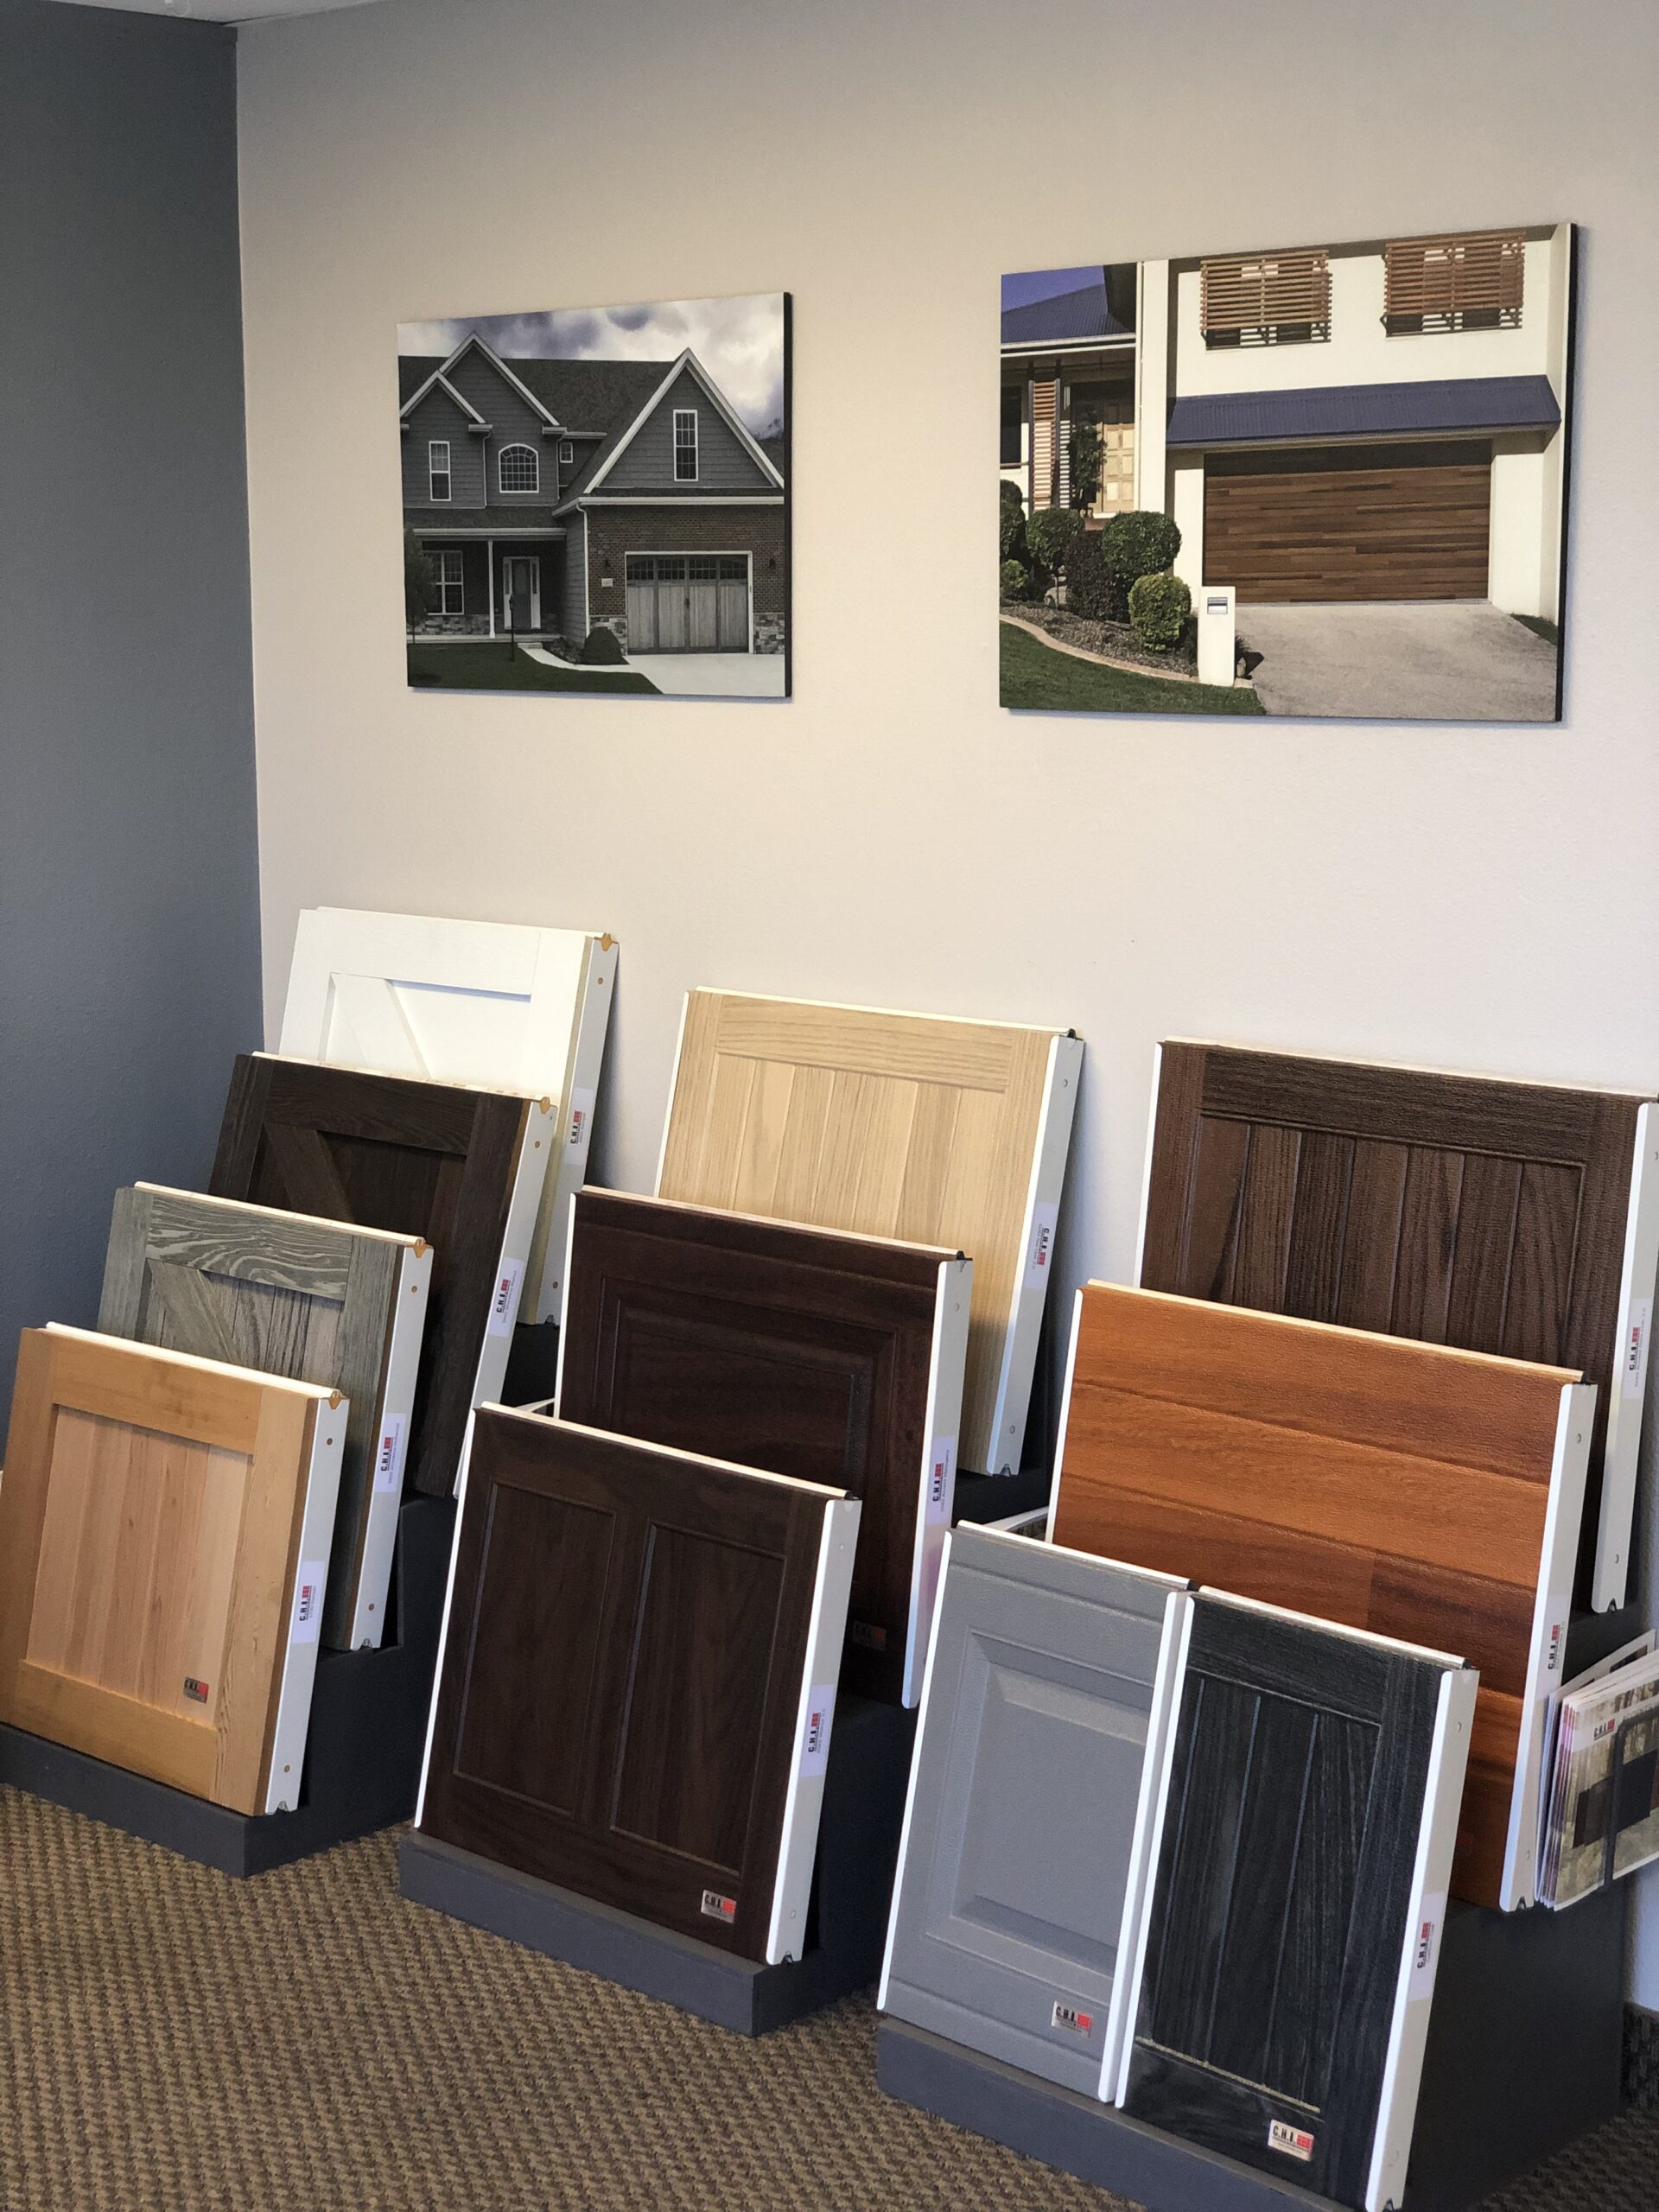 This is an image of some garage door panel samples of various styles and colors at the Entry Systems design center in Laguna Hills, California.